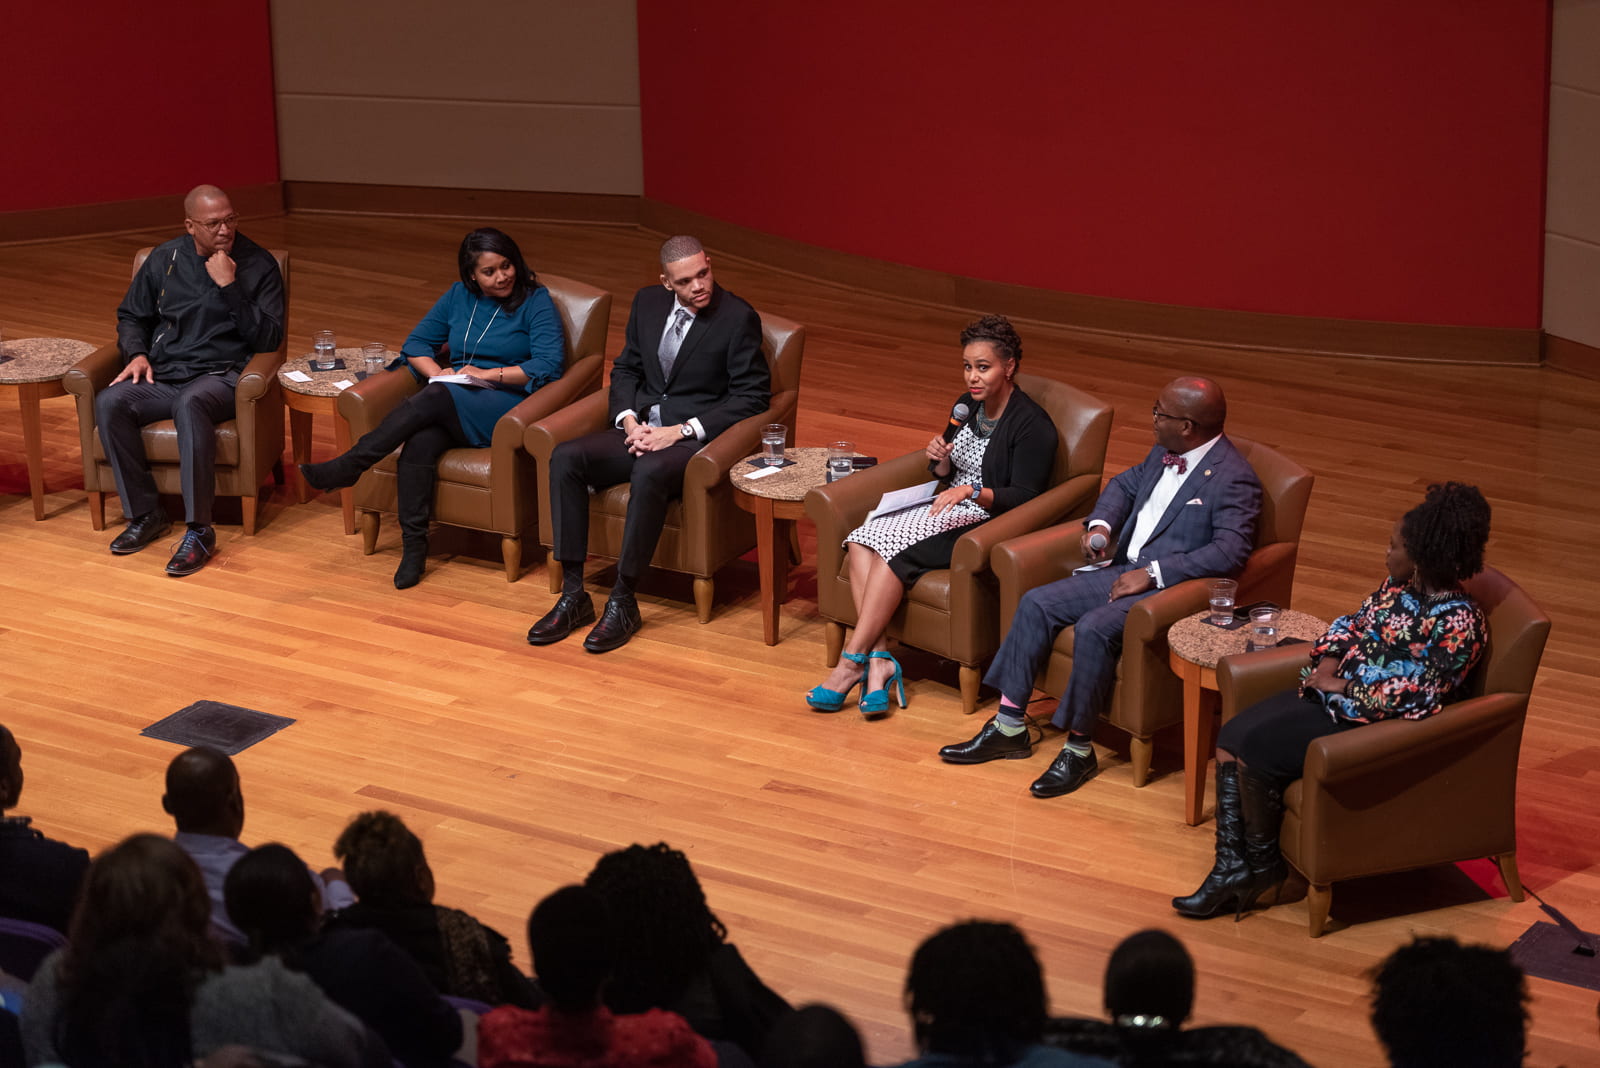 The featured panel members speak about their experiences. From left to right: Edward Jones, Charmaine Brown, Collin Mays, Tiara Dungy, Kim Nyoni, Akilah Wallace.